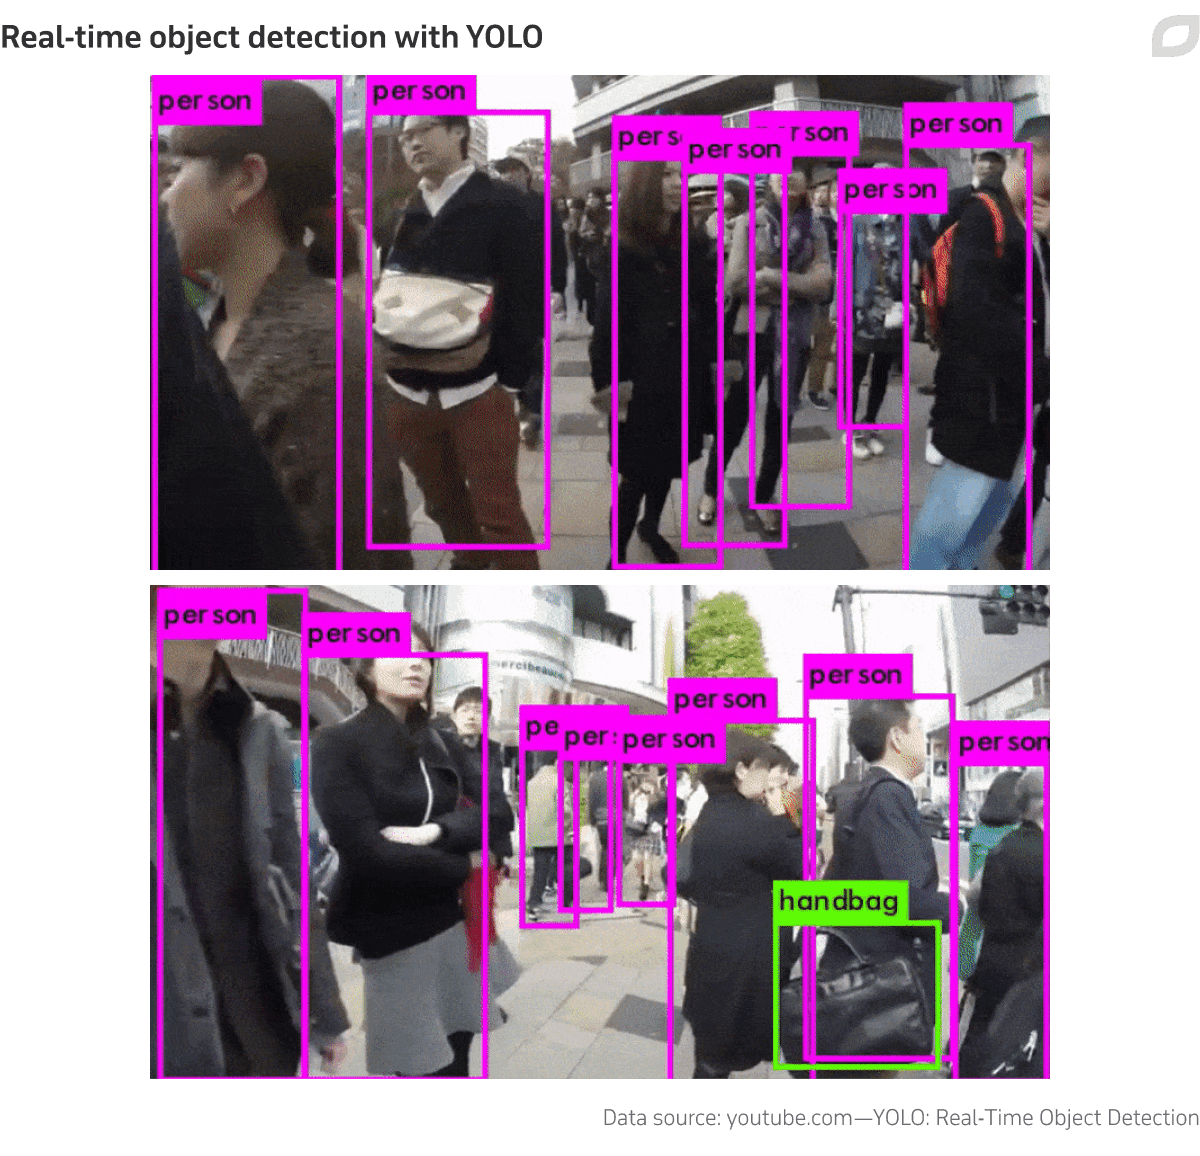 Real-time object detection with YOLO